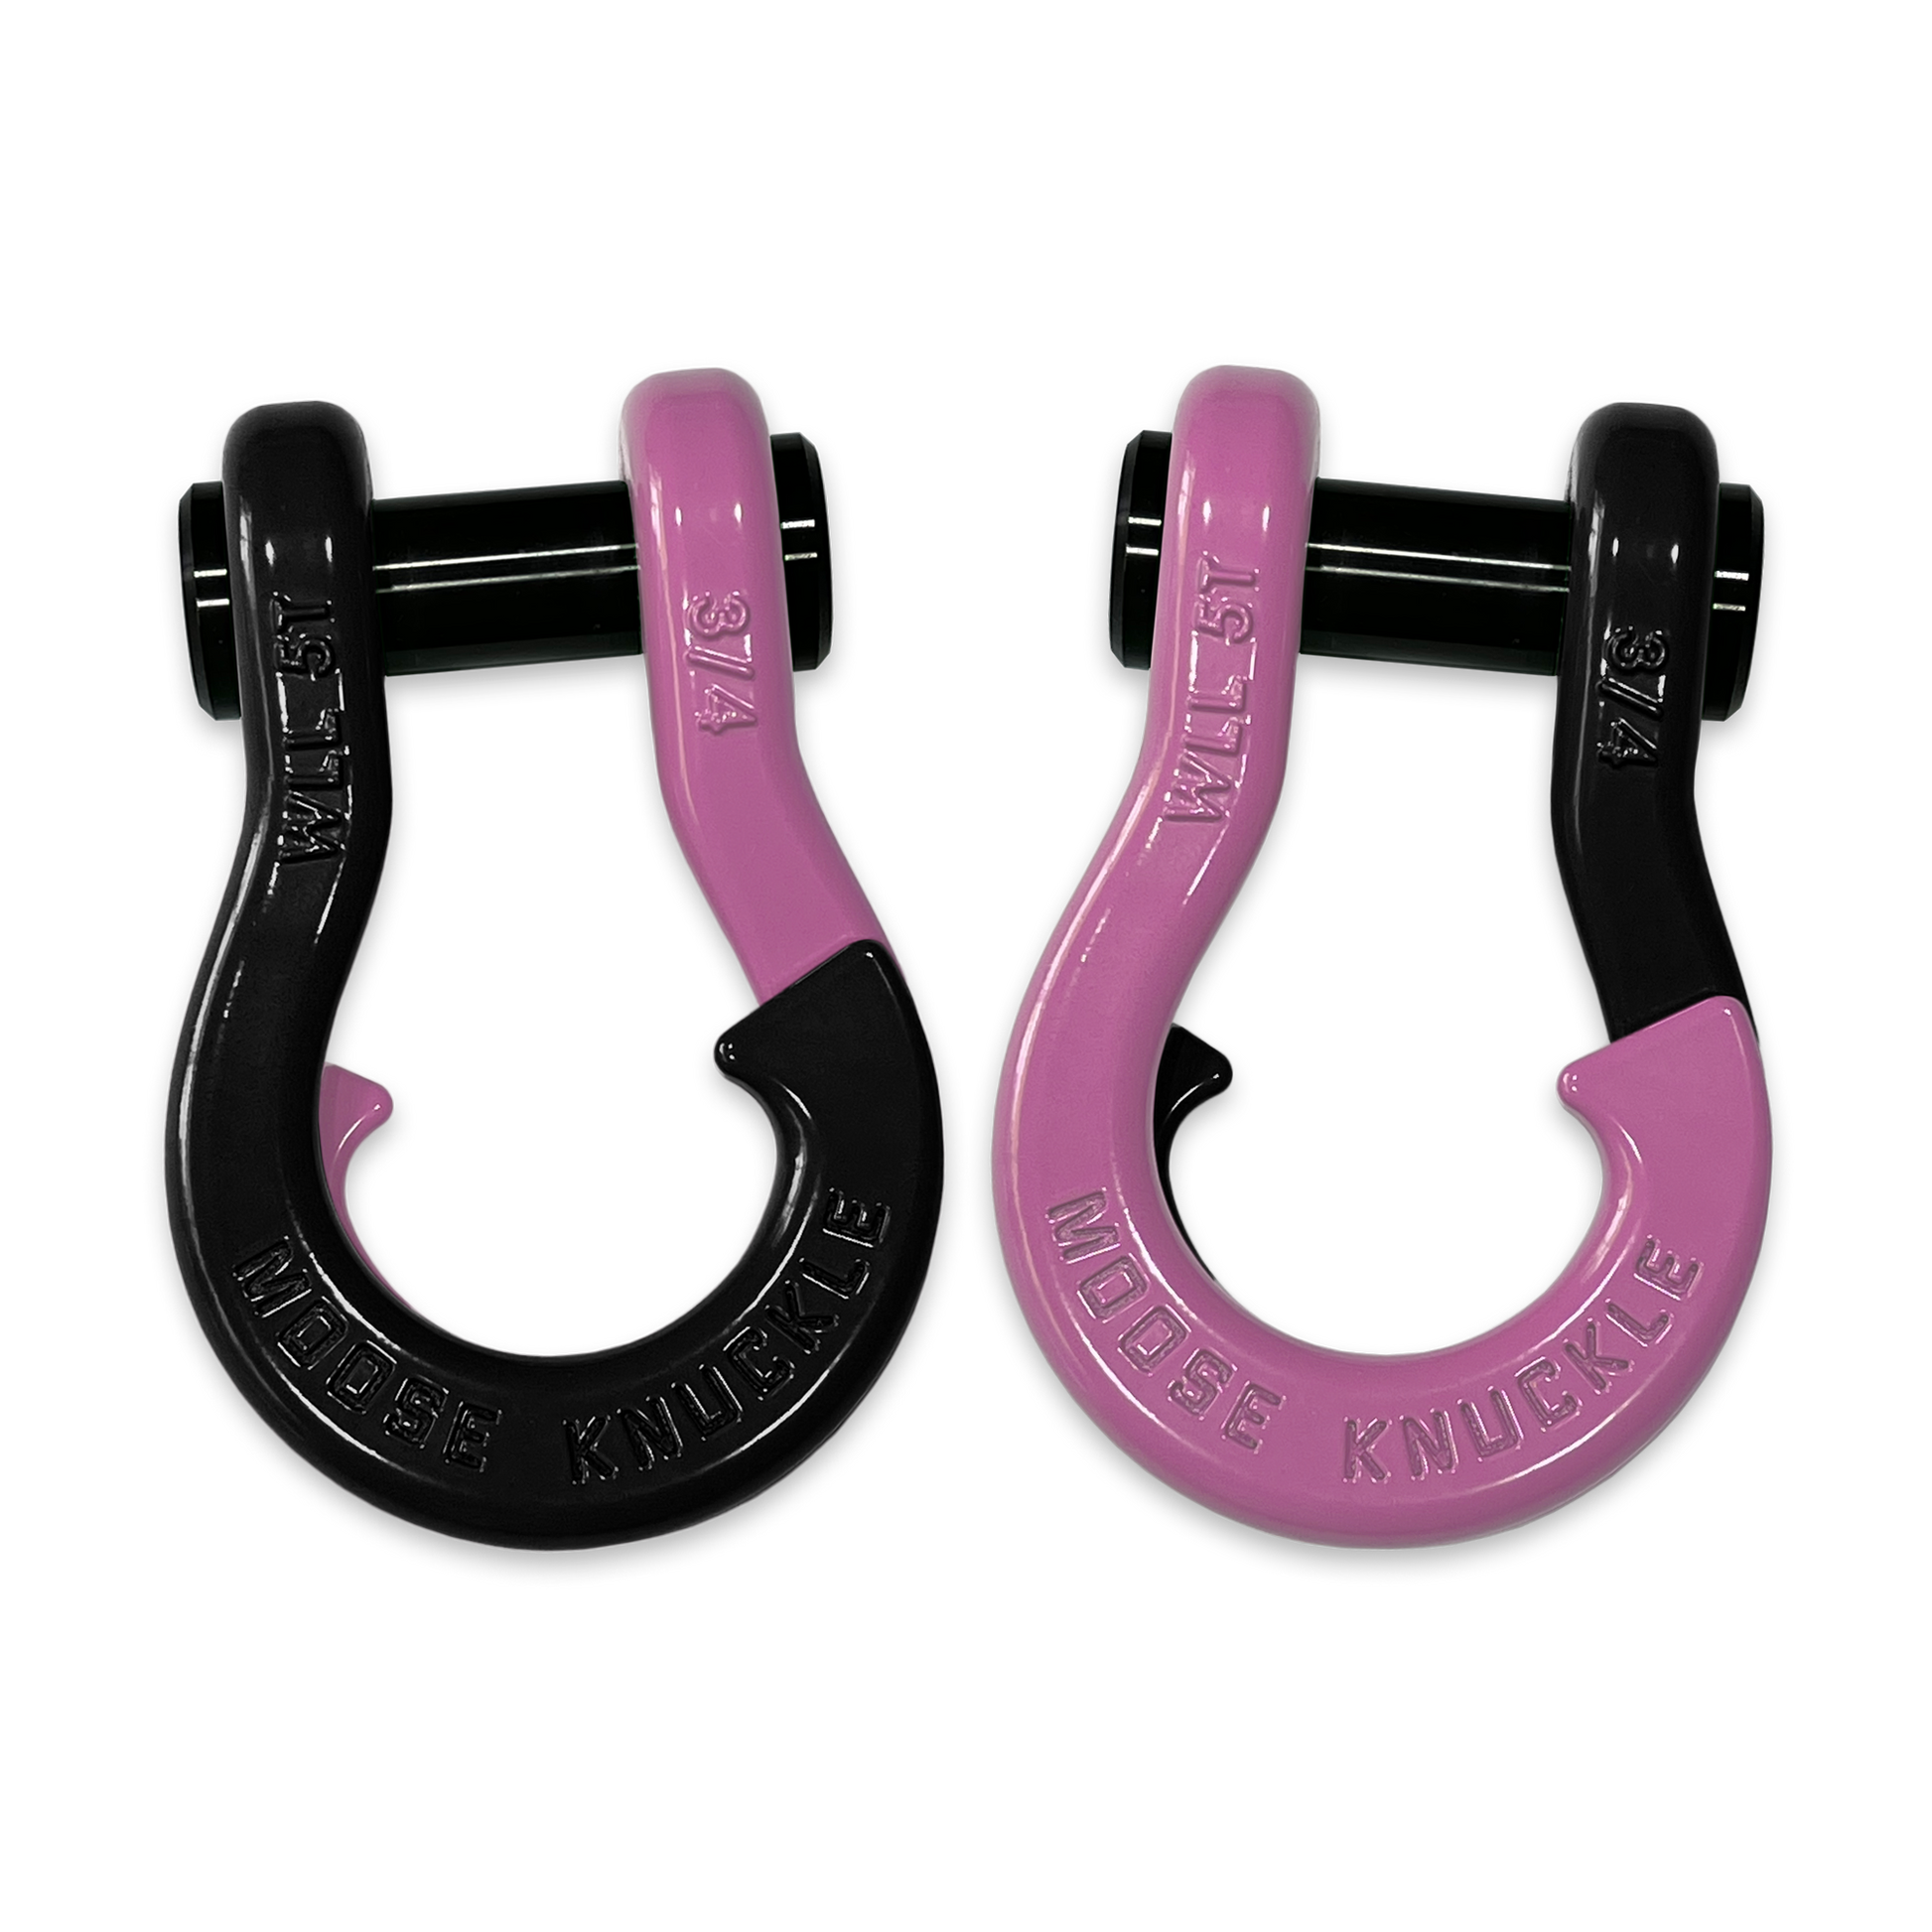 Moose Knuckle's Jowl Recovery Split Shackle 3/4 in Black Hole and Pretty Pink Combo